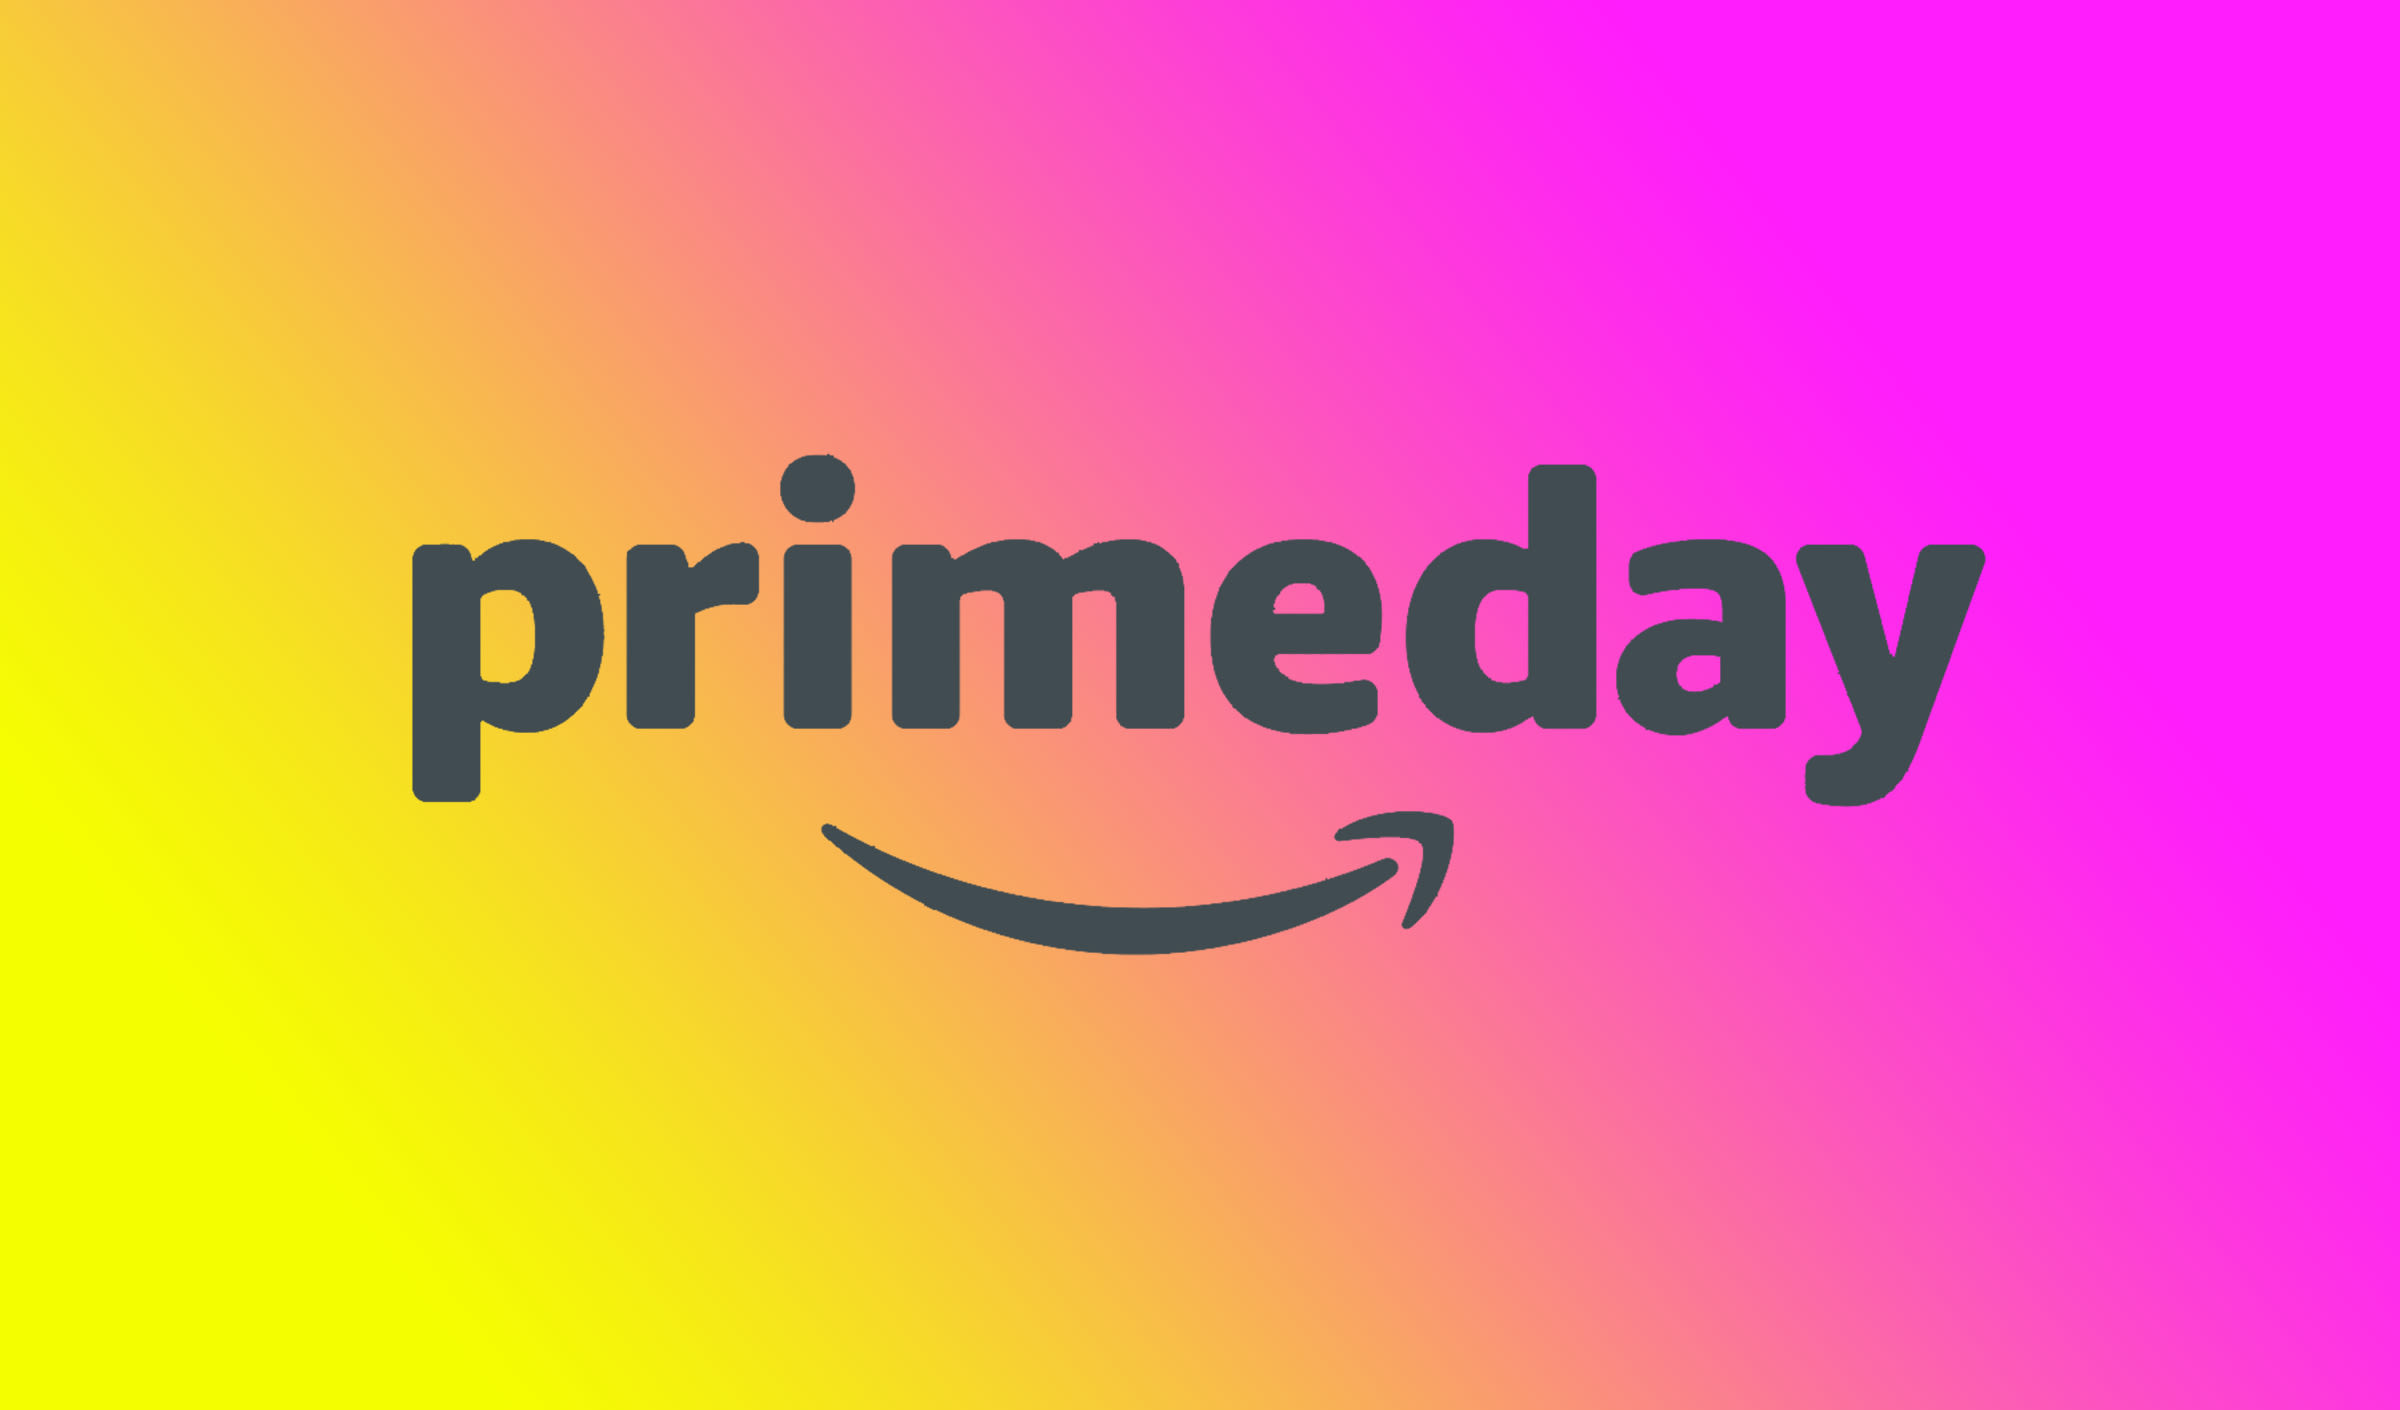 Tuesday’s top Prime Day deals: $169 AirPods Pro 2, free Robux, LG OLED TVs, laptops, Dyson, Bose, more